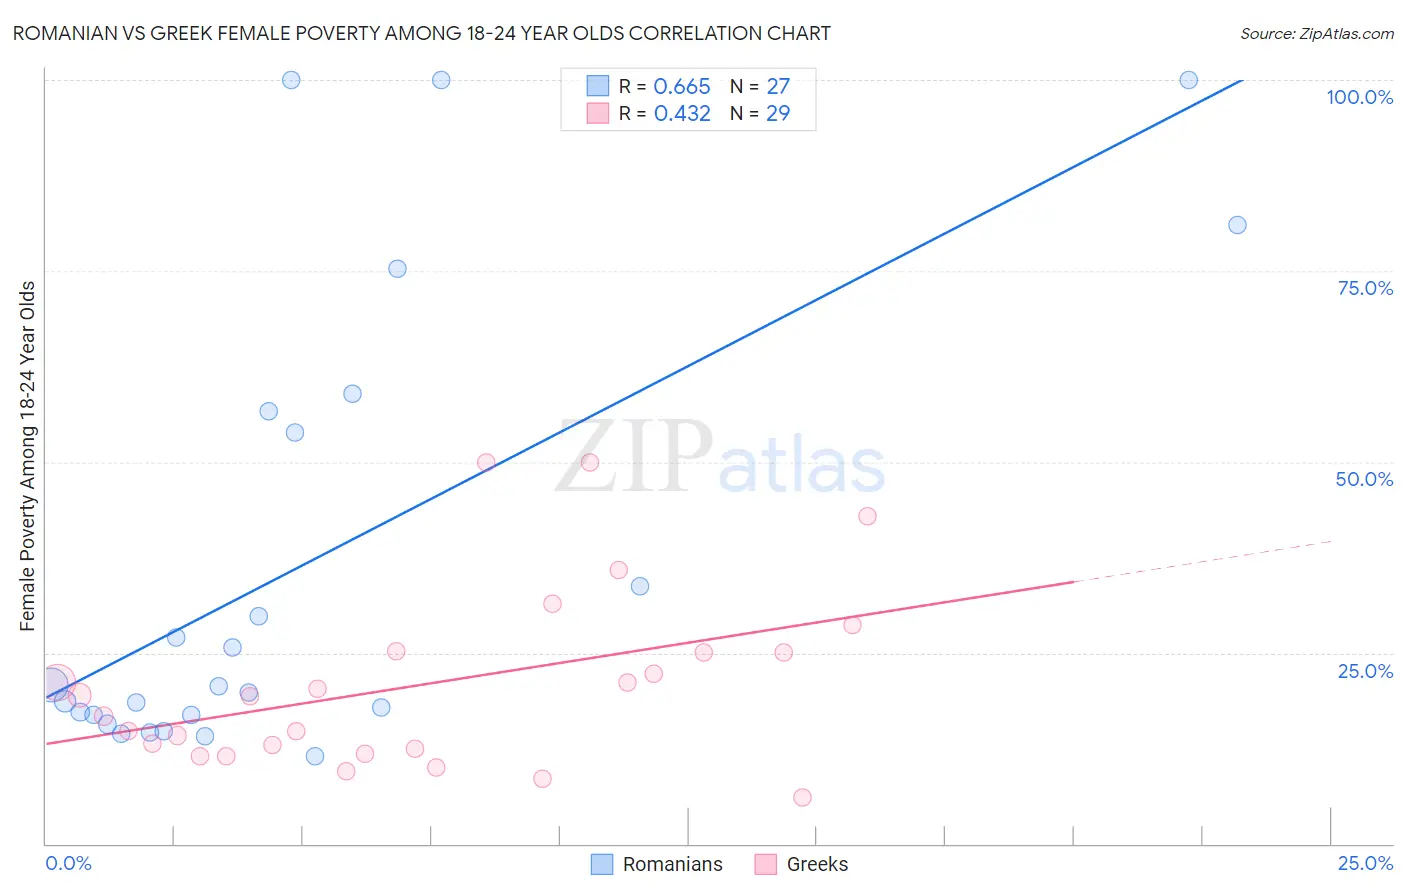 Romanian vs Greek Female Poverty Among 18-24 Year Olds